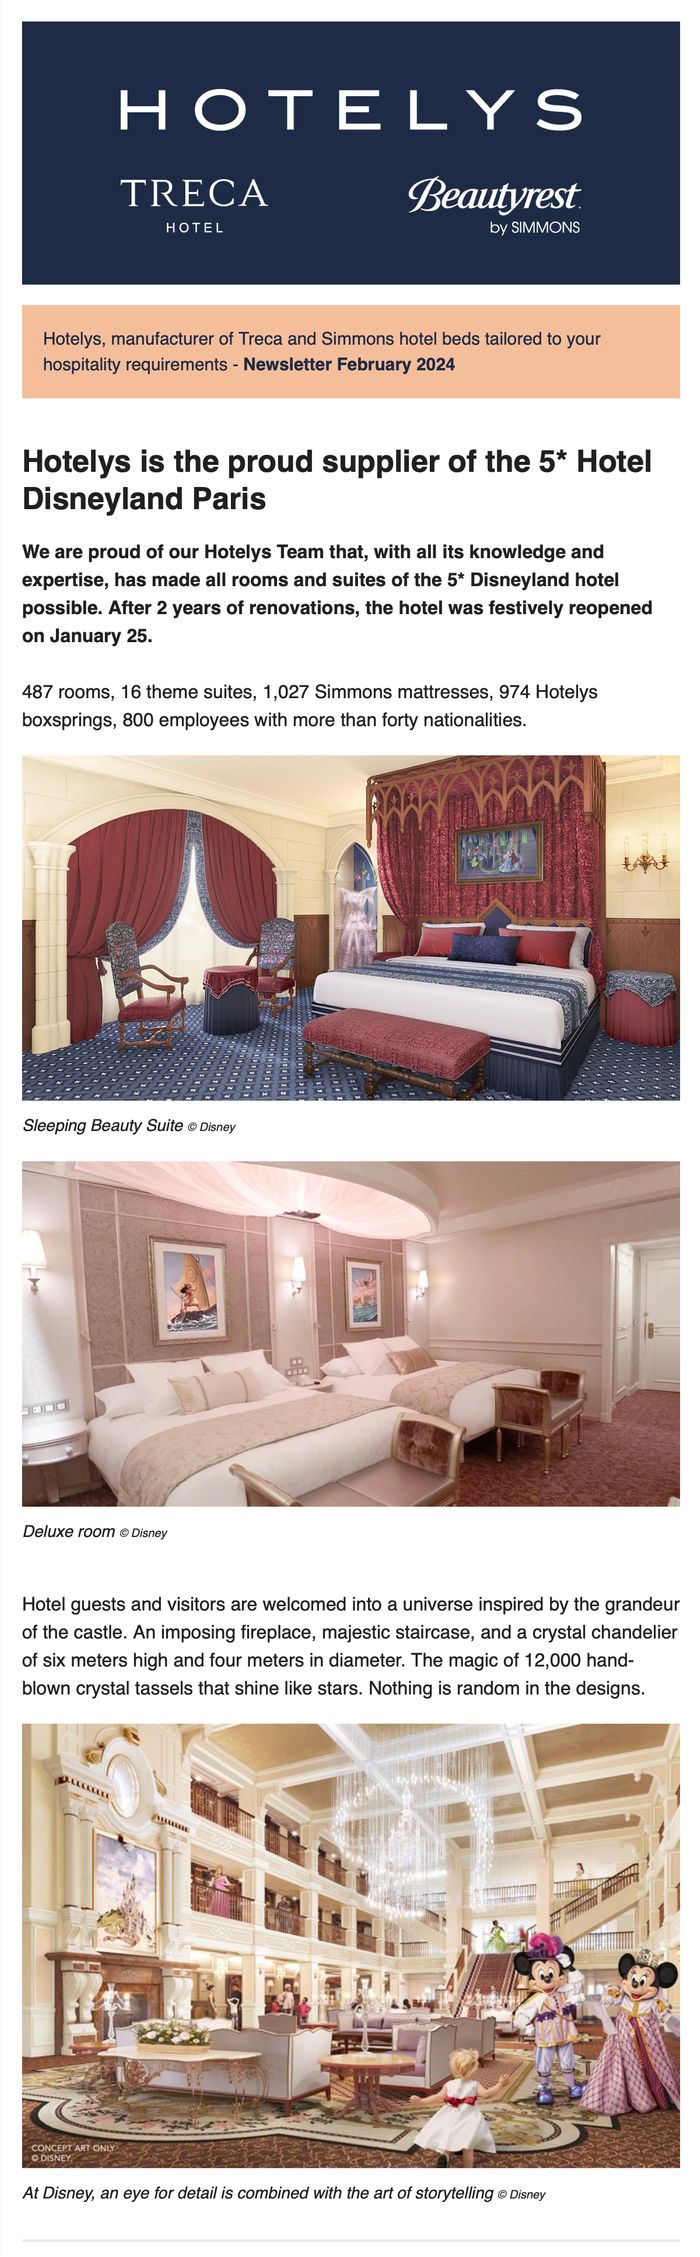 Hotelys is the proud supplier of the 5* Hotel Disneyland Paris